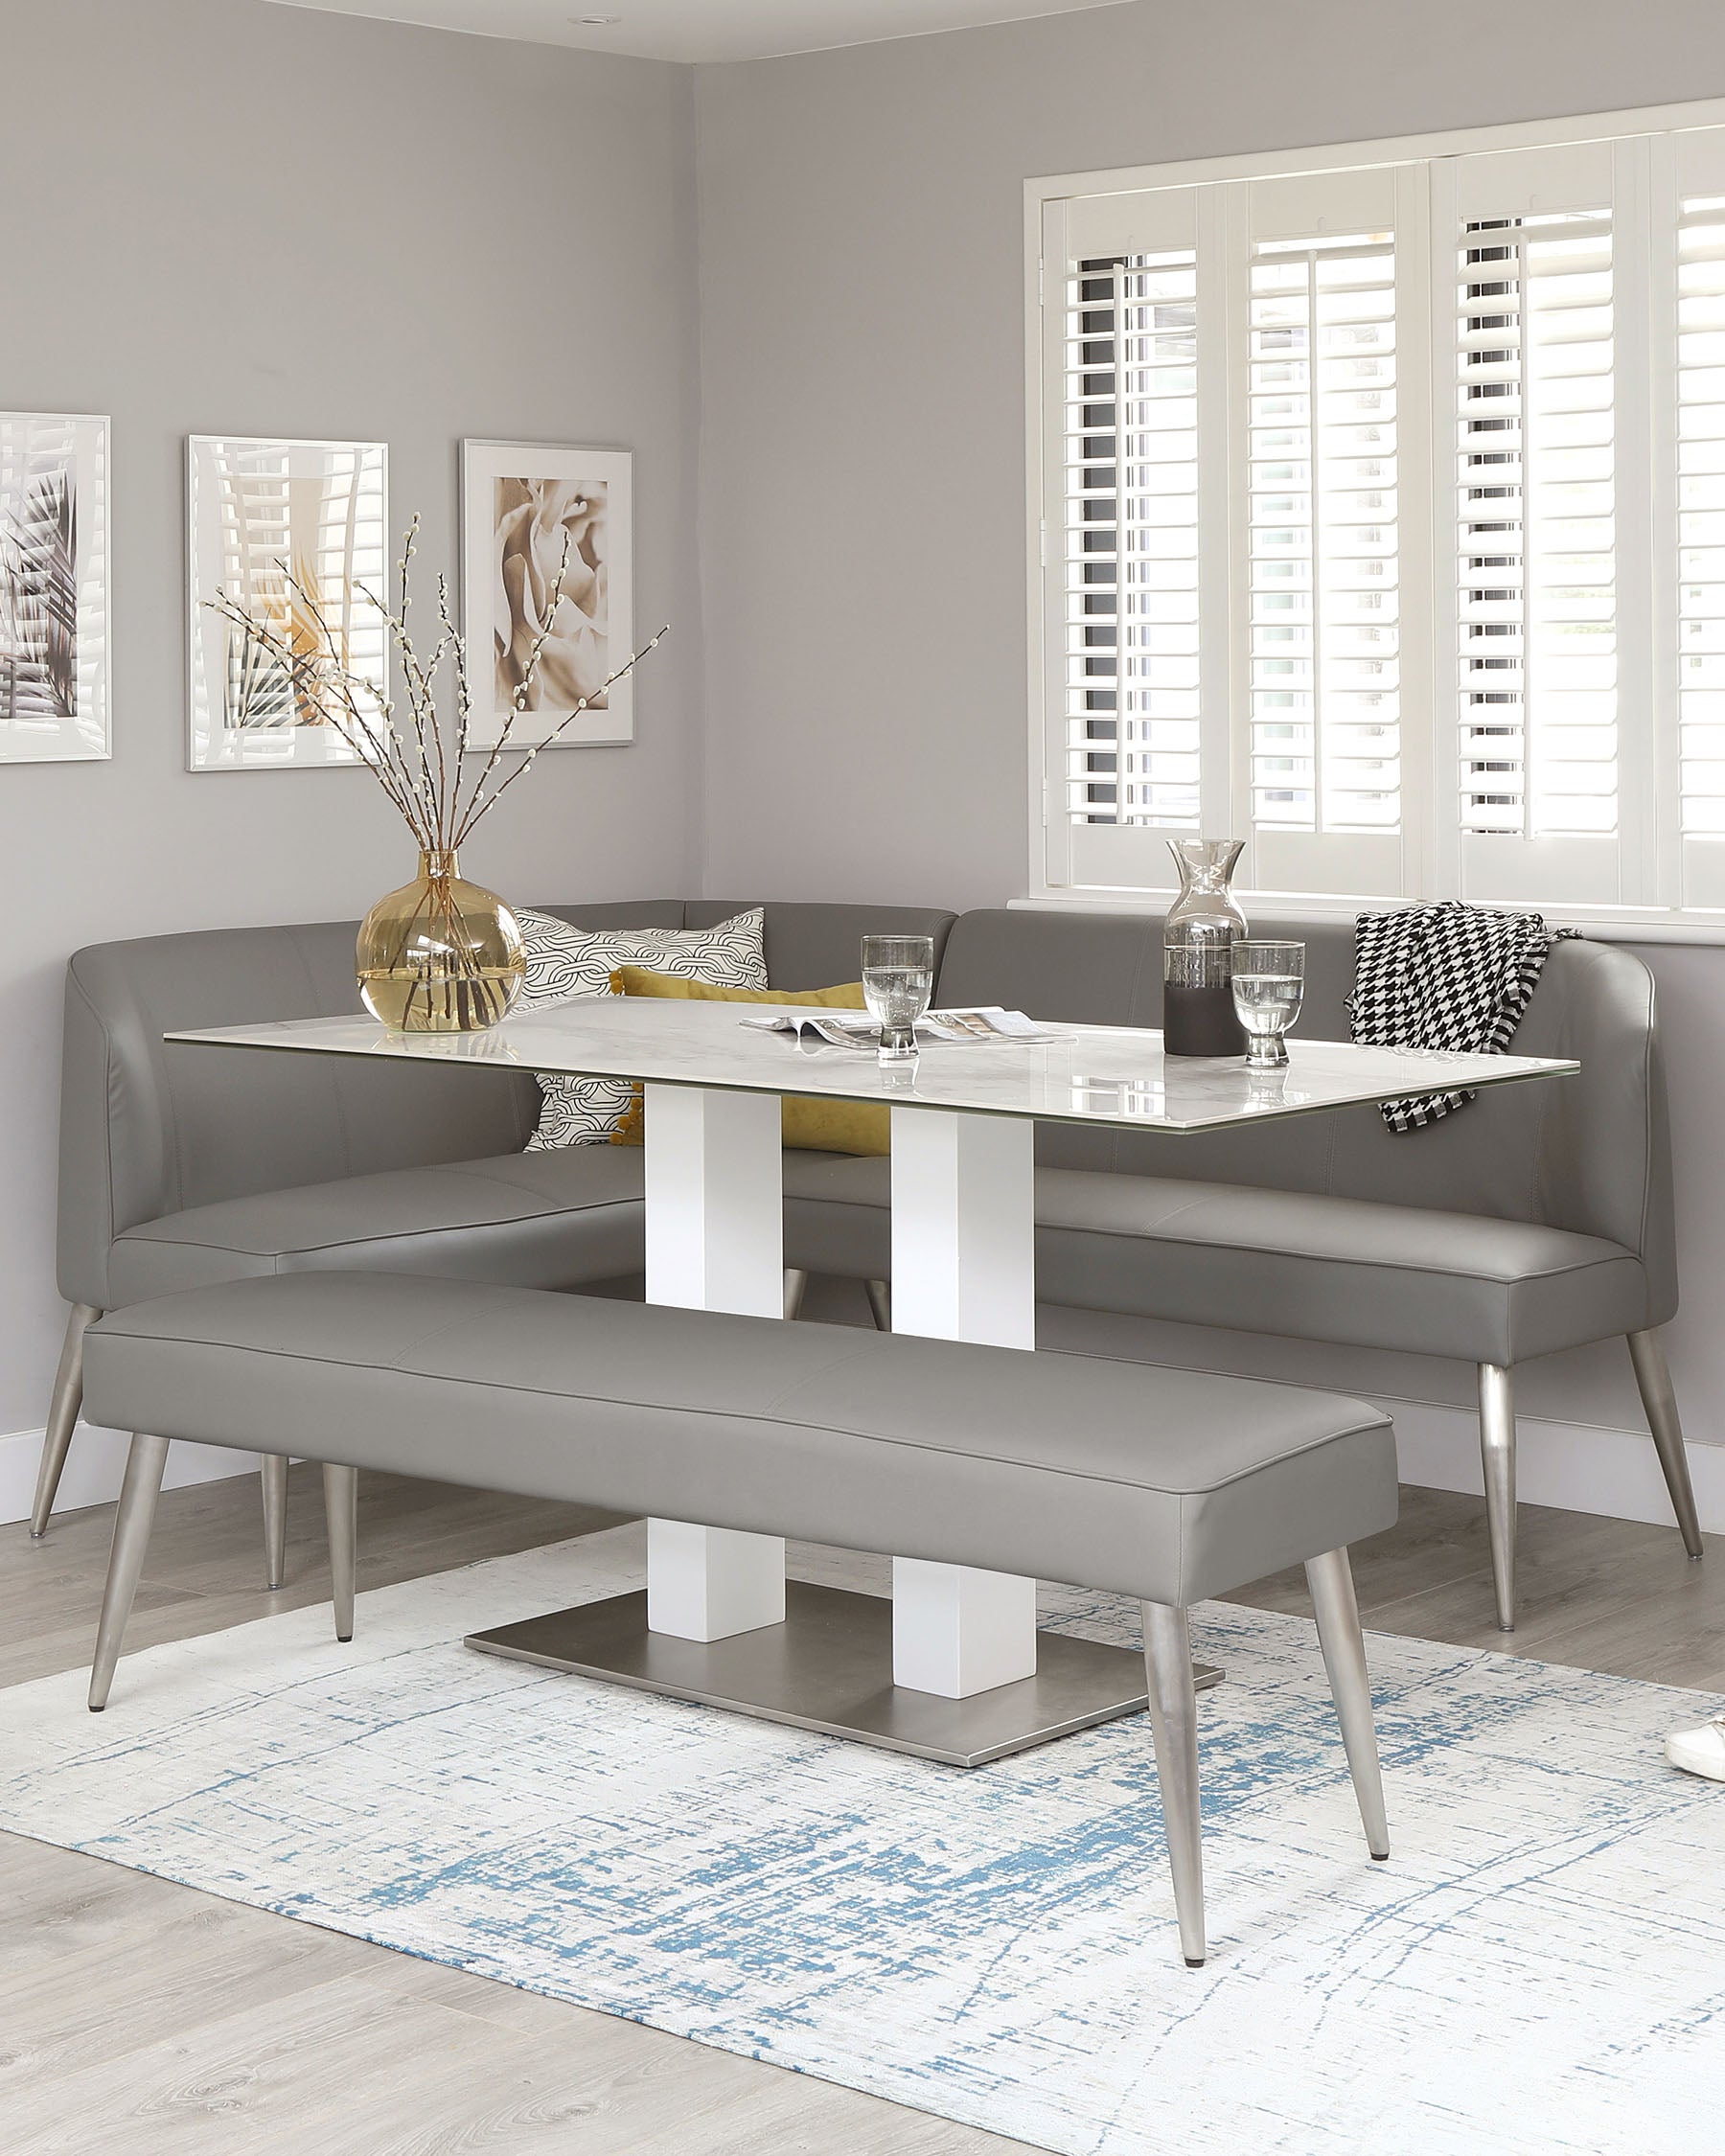 Mia Ceramic Marble Table With Mellow Right Hand Corner Bench Set